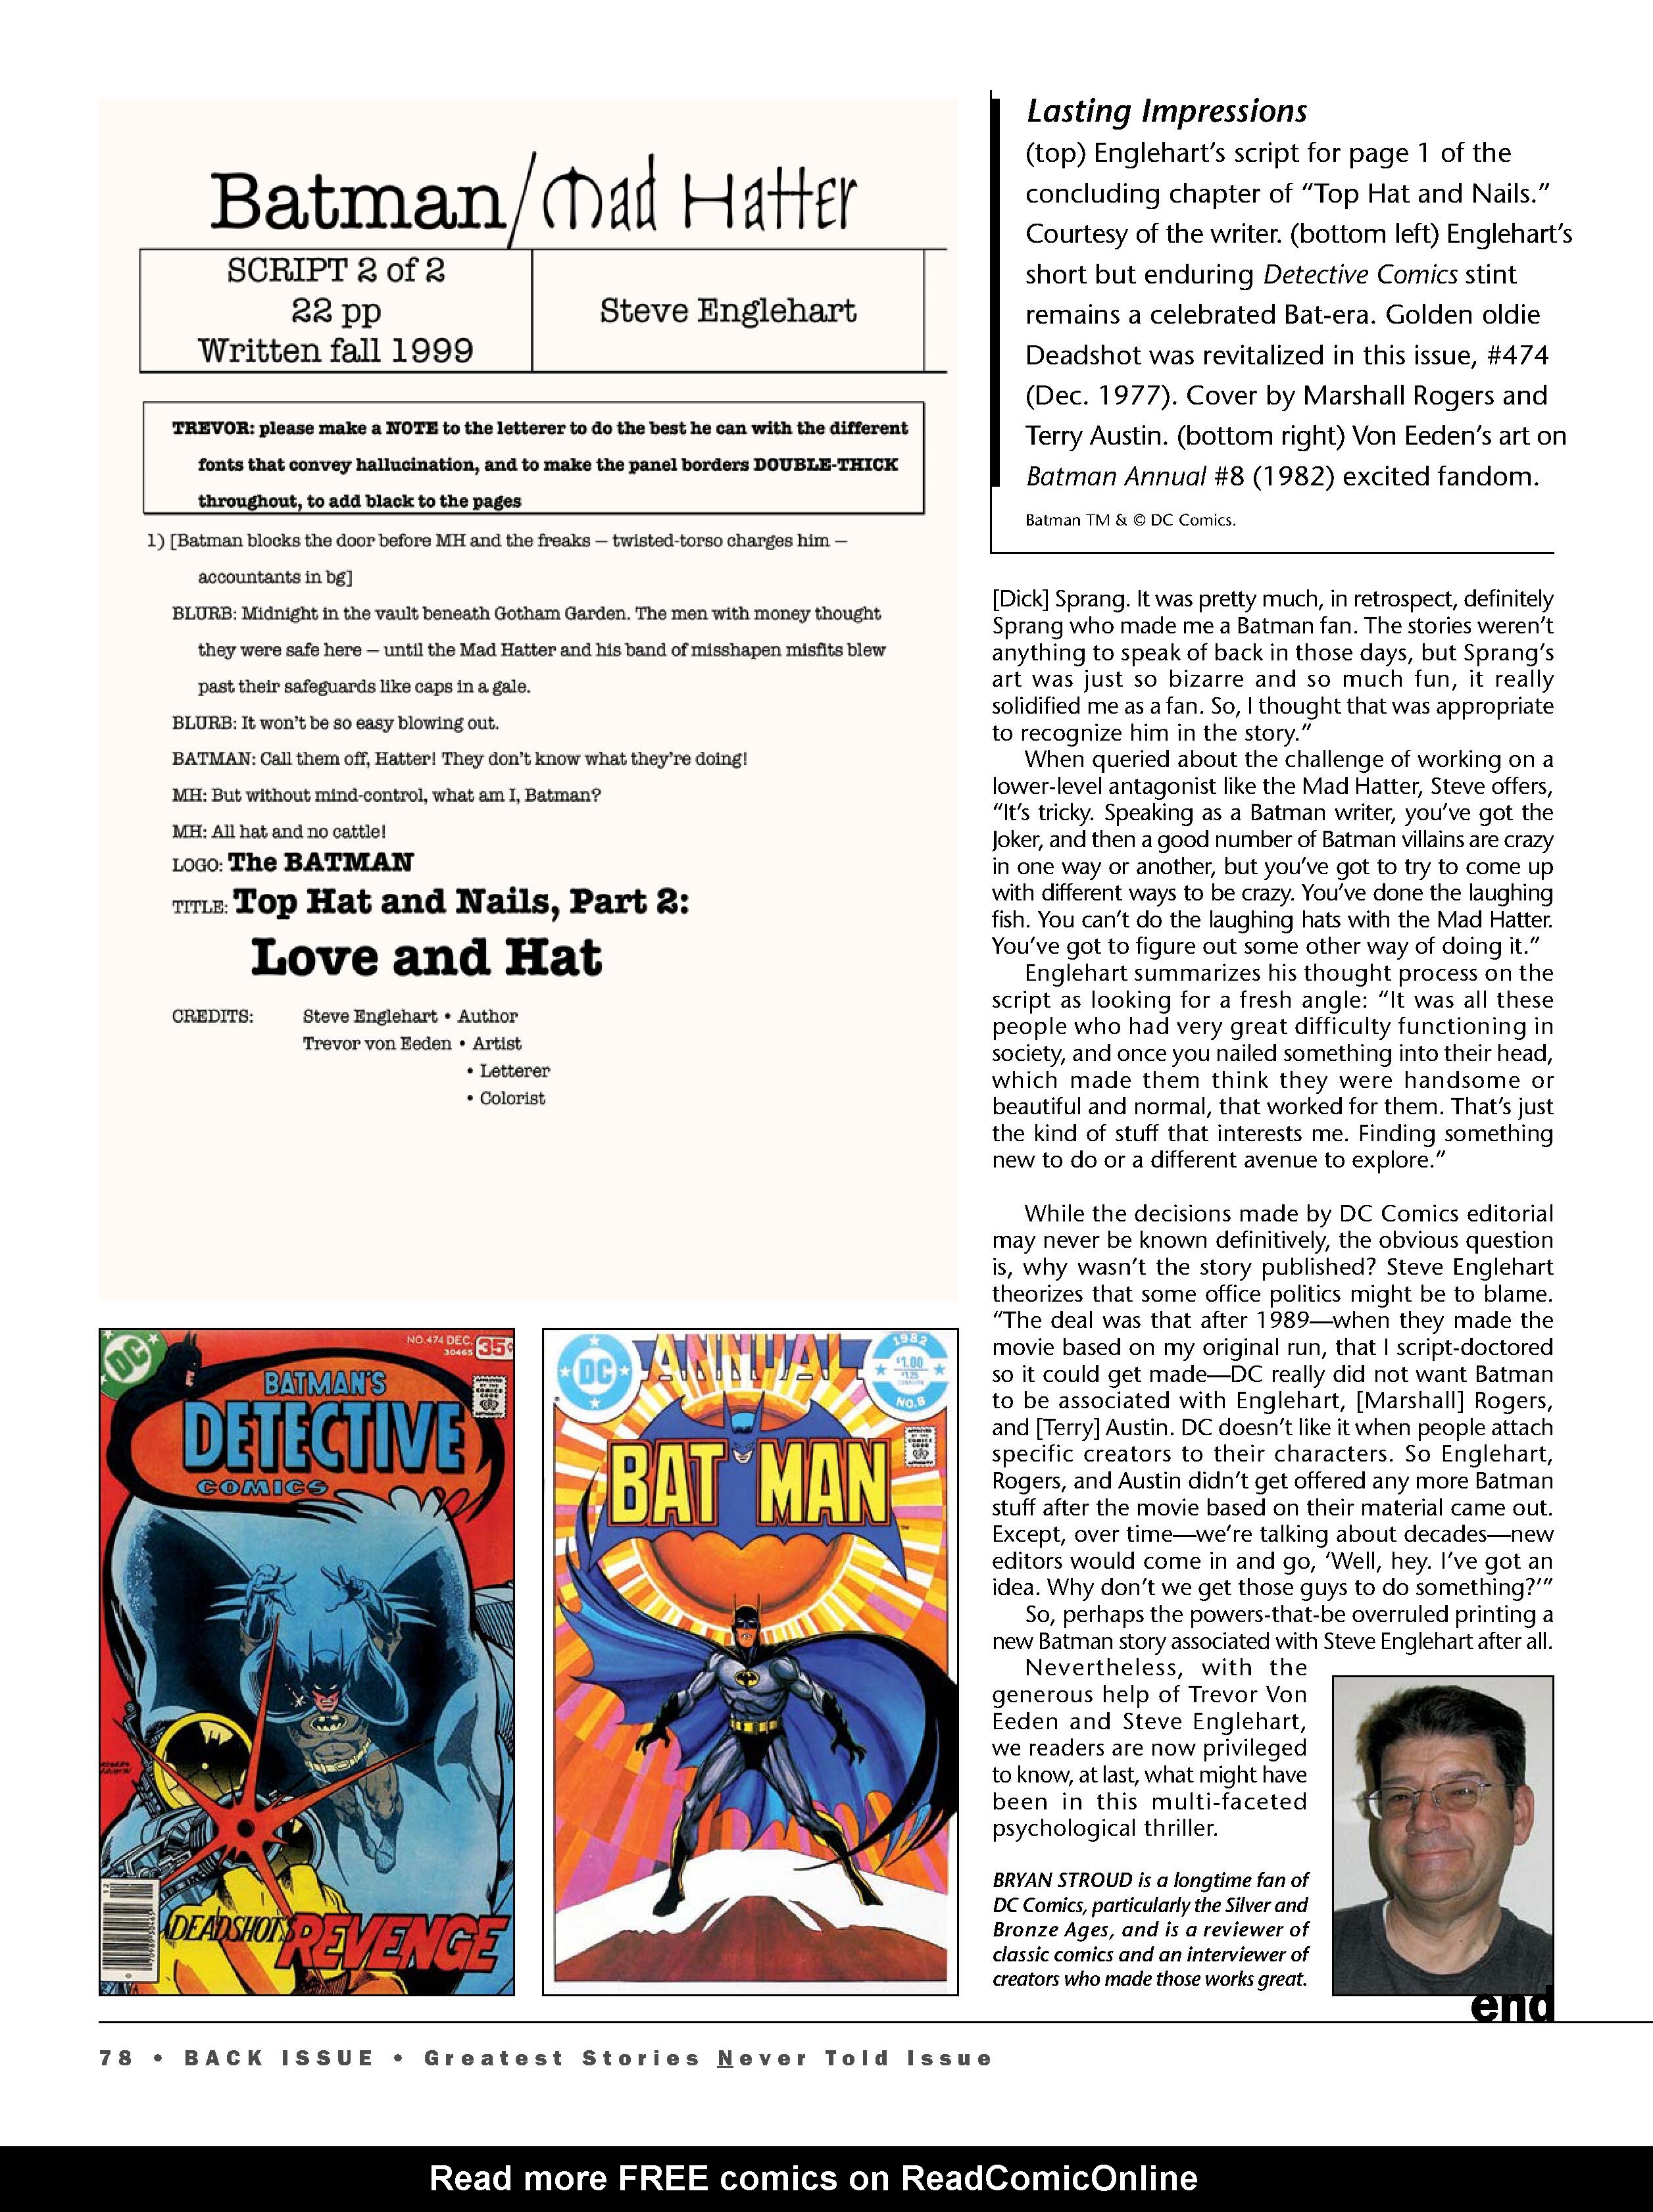 Read online Back Issue comic -  Issue #118 - 80